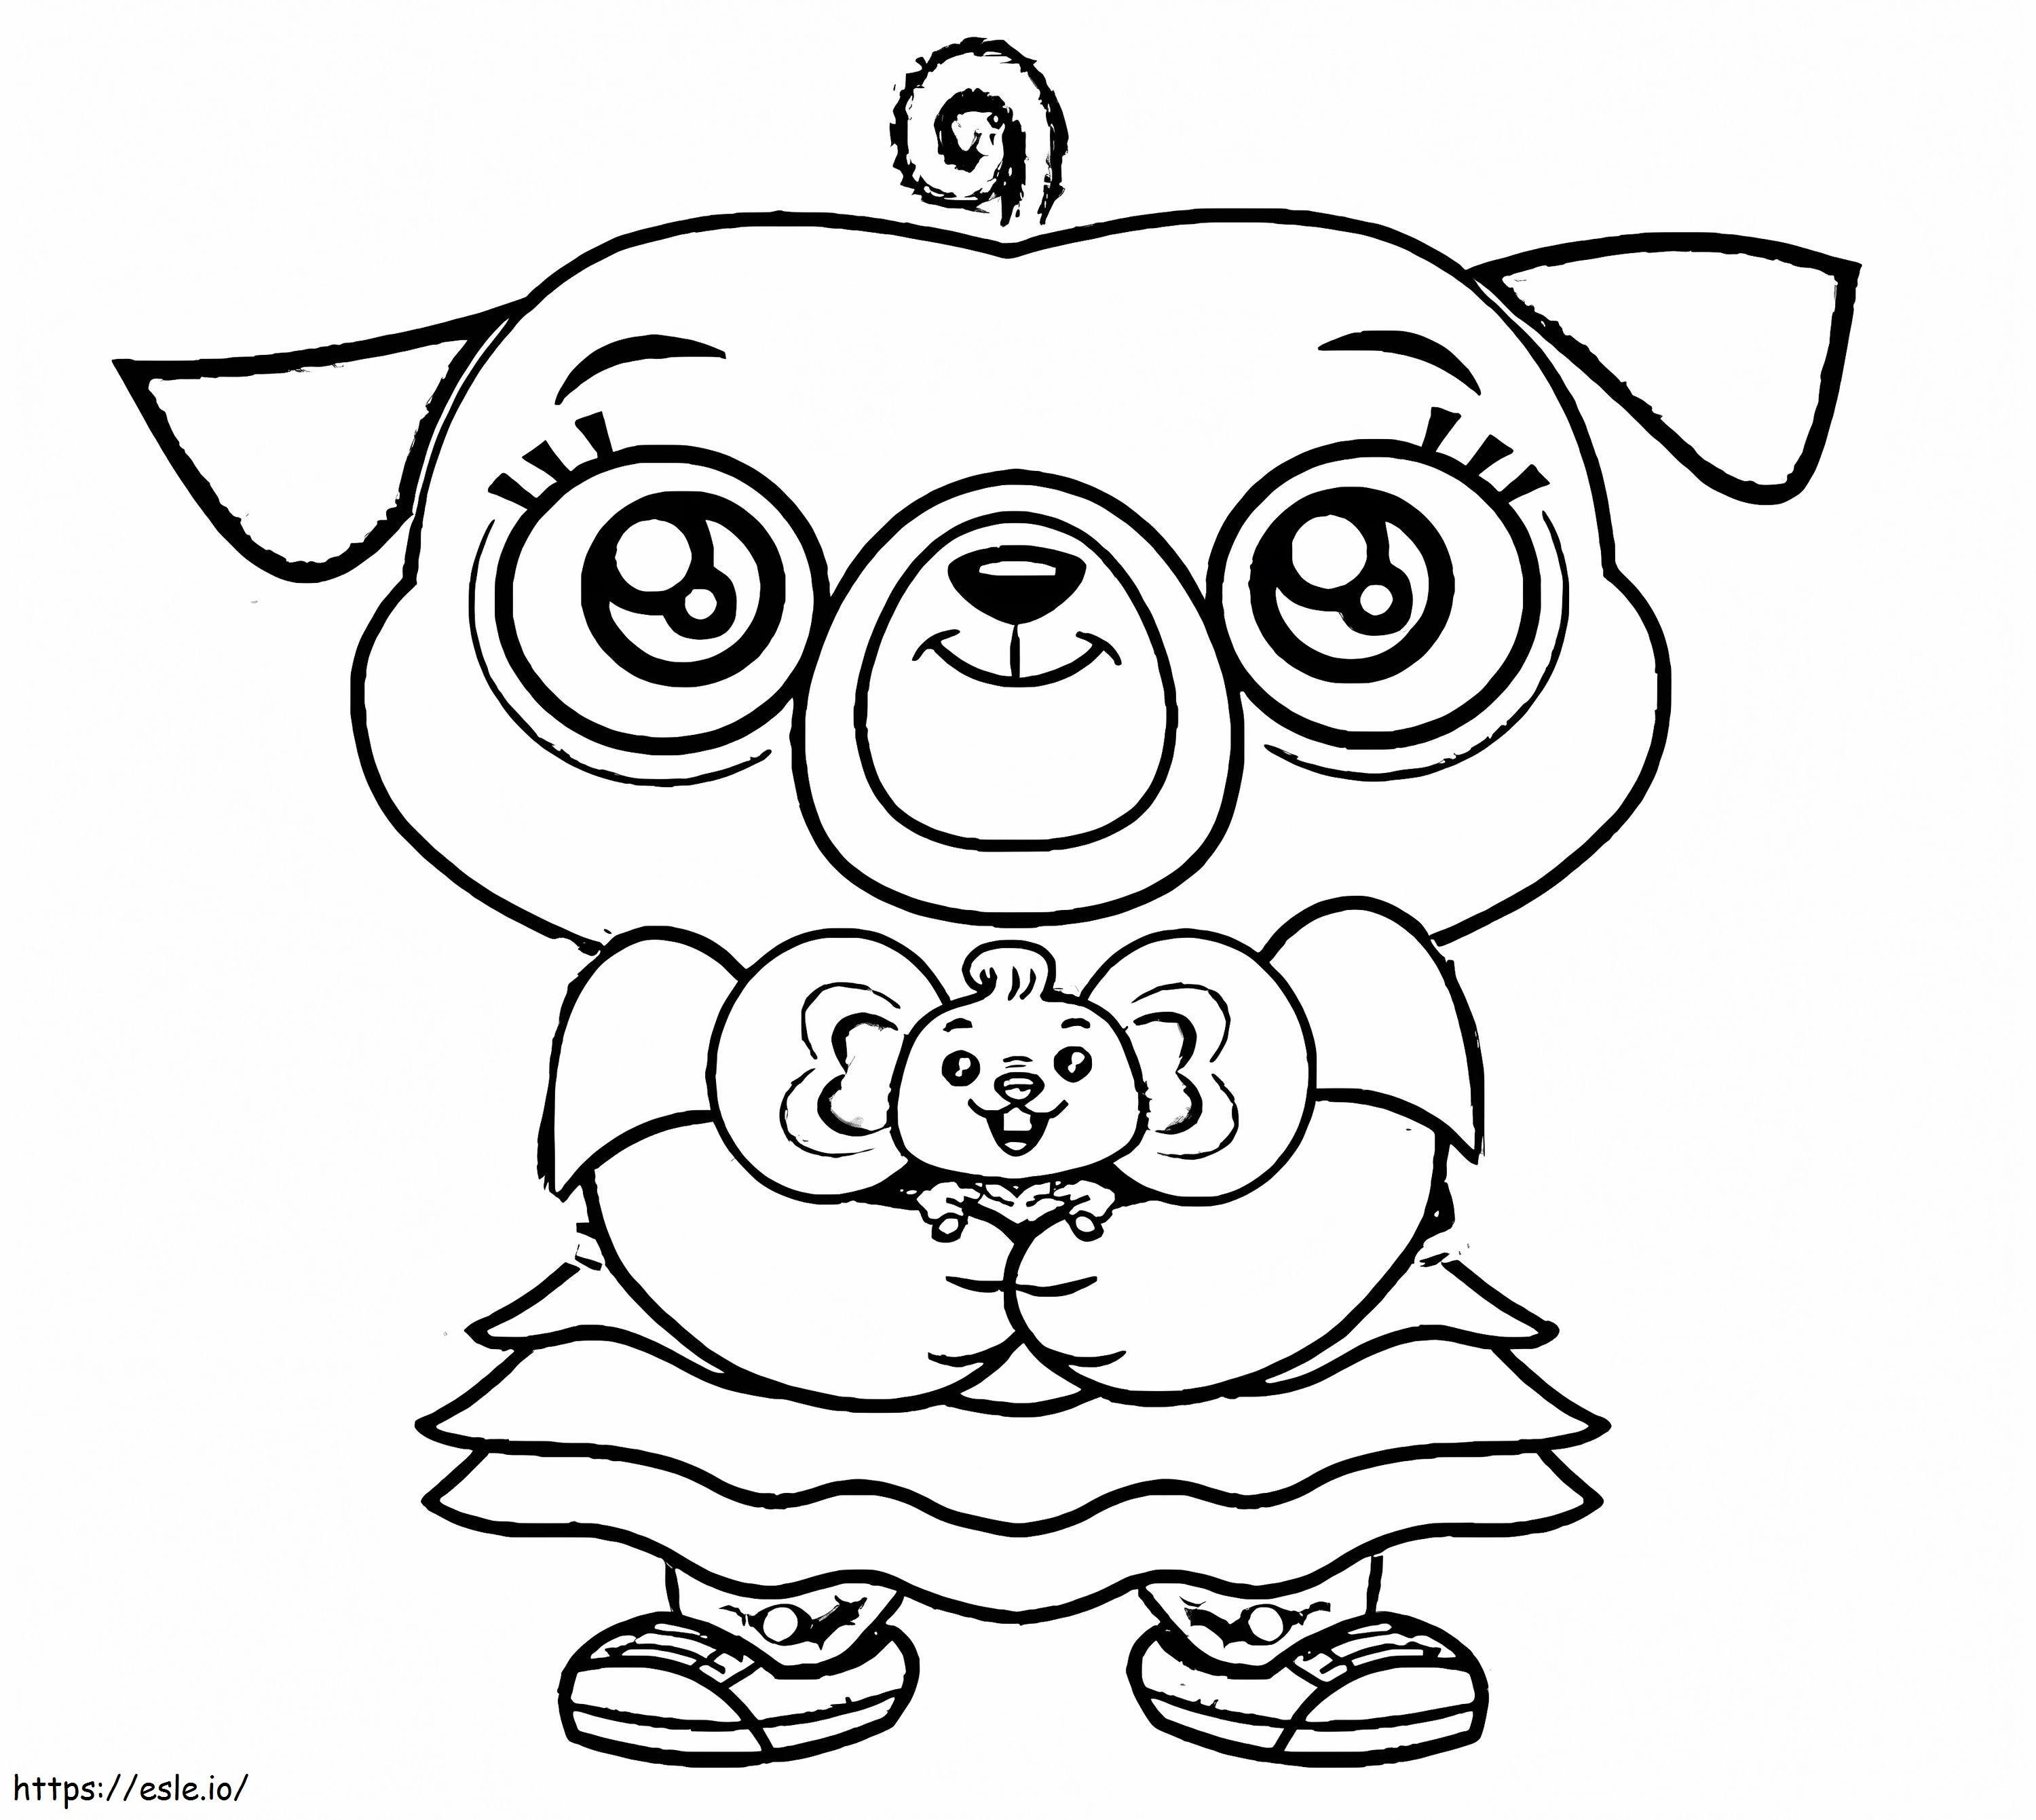 Cute Chip And Potato coloring page